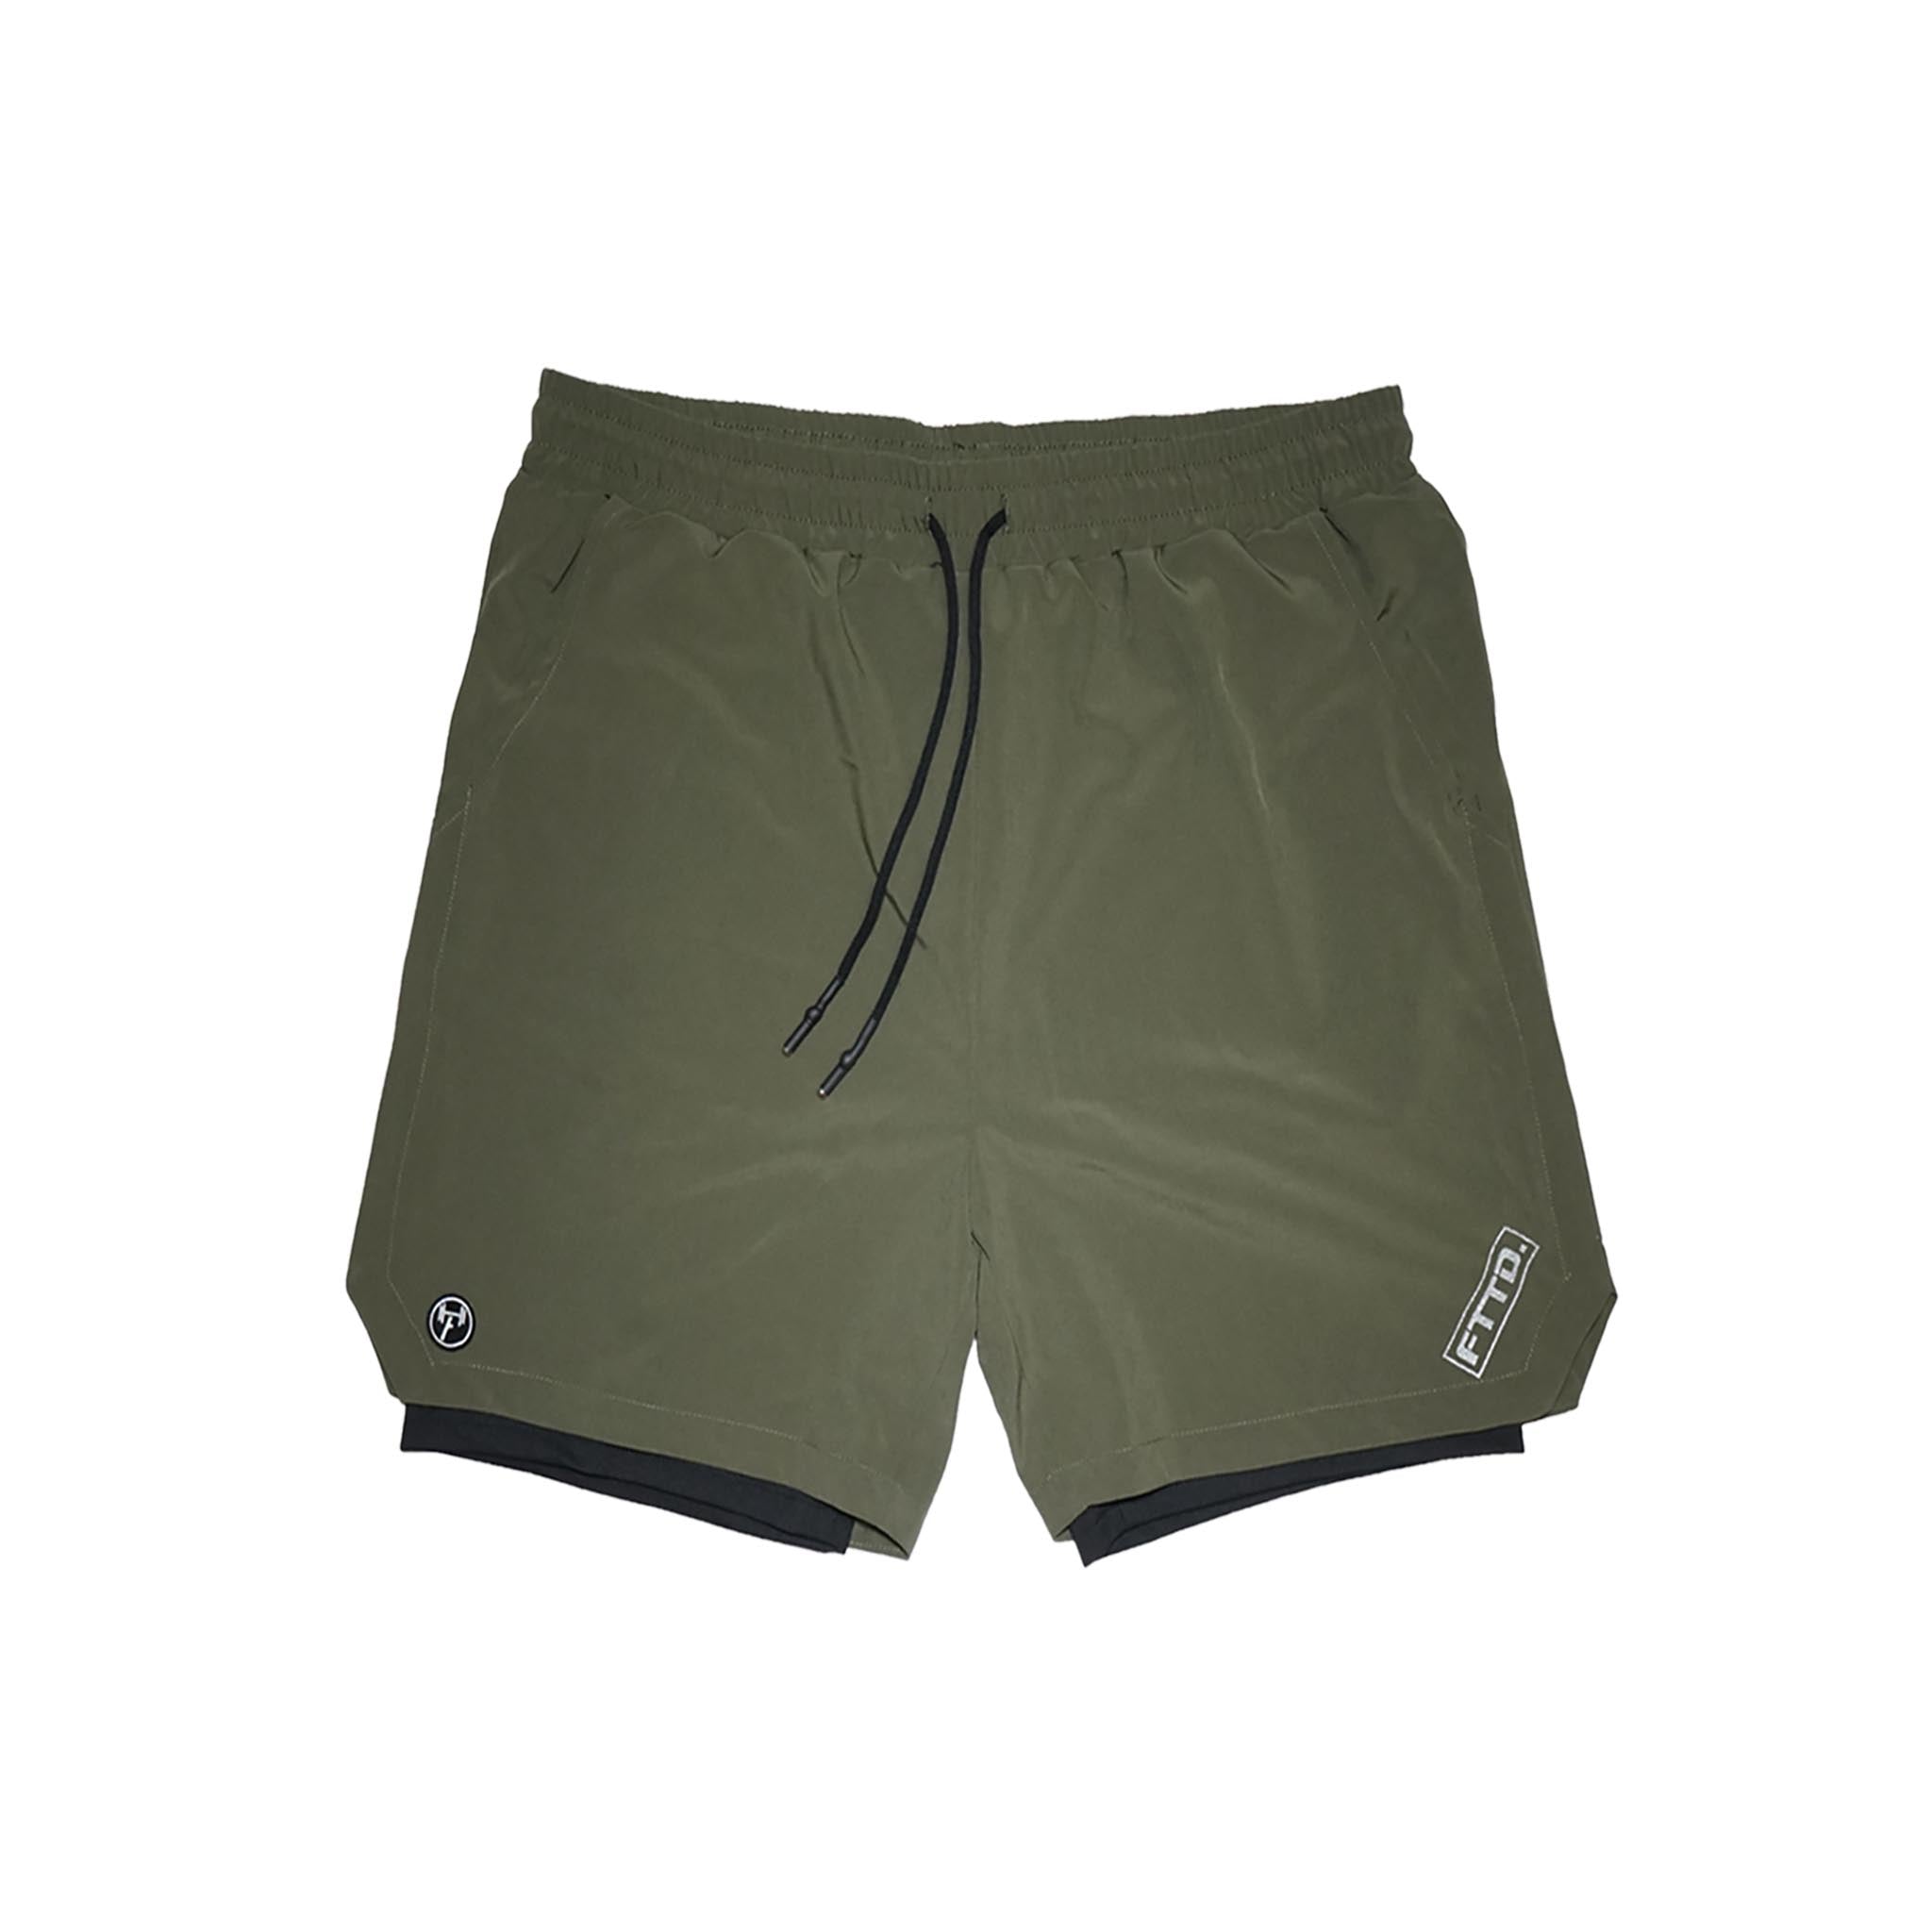 FITTED PERFORMANCE SHORTS - OLIVE GREEN